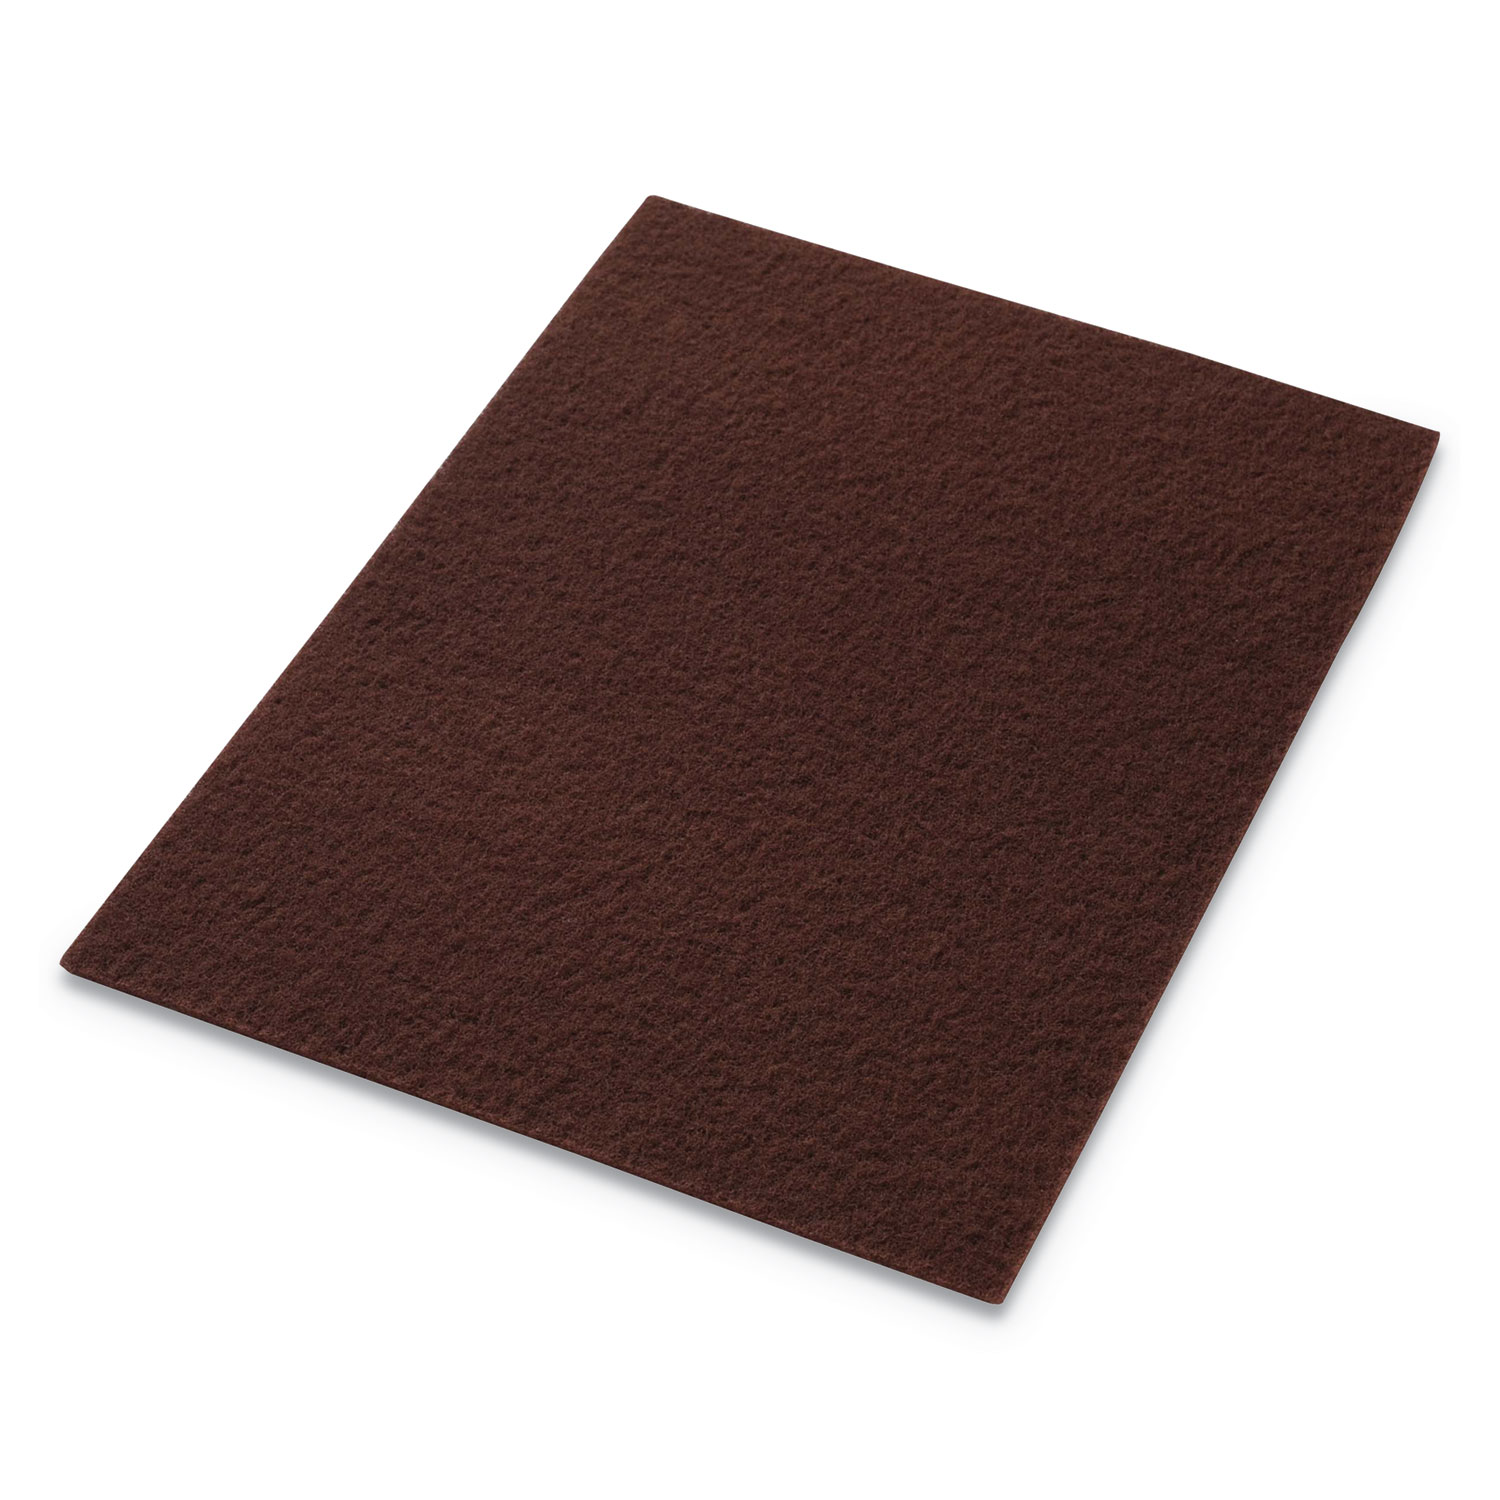  Americo 42071428 EcoPrep EPP Specialty Pads, 28w x 14h, Maroon, 10/CT (AMF42071428) 